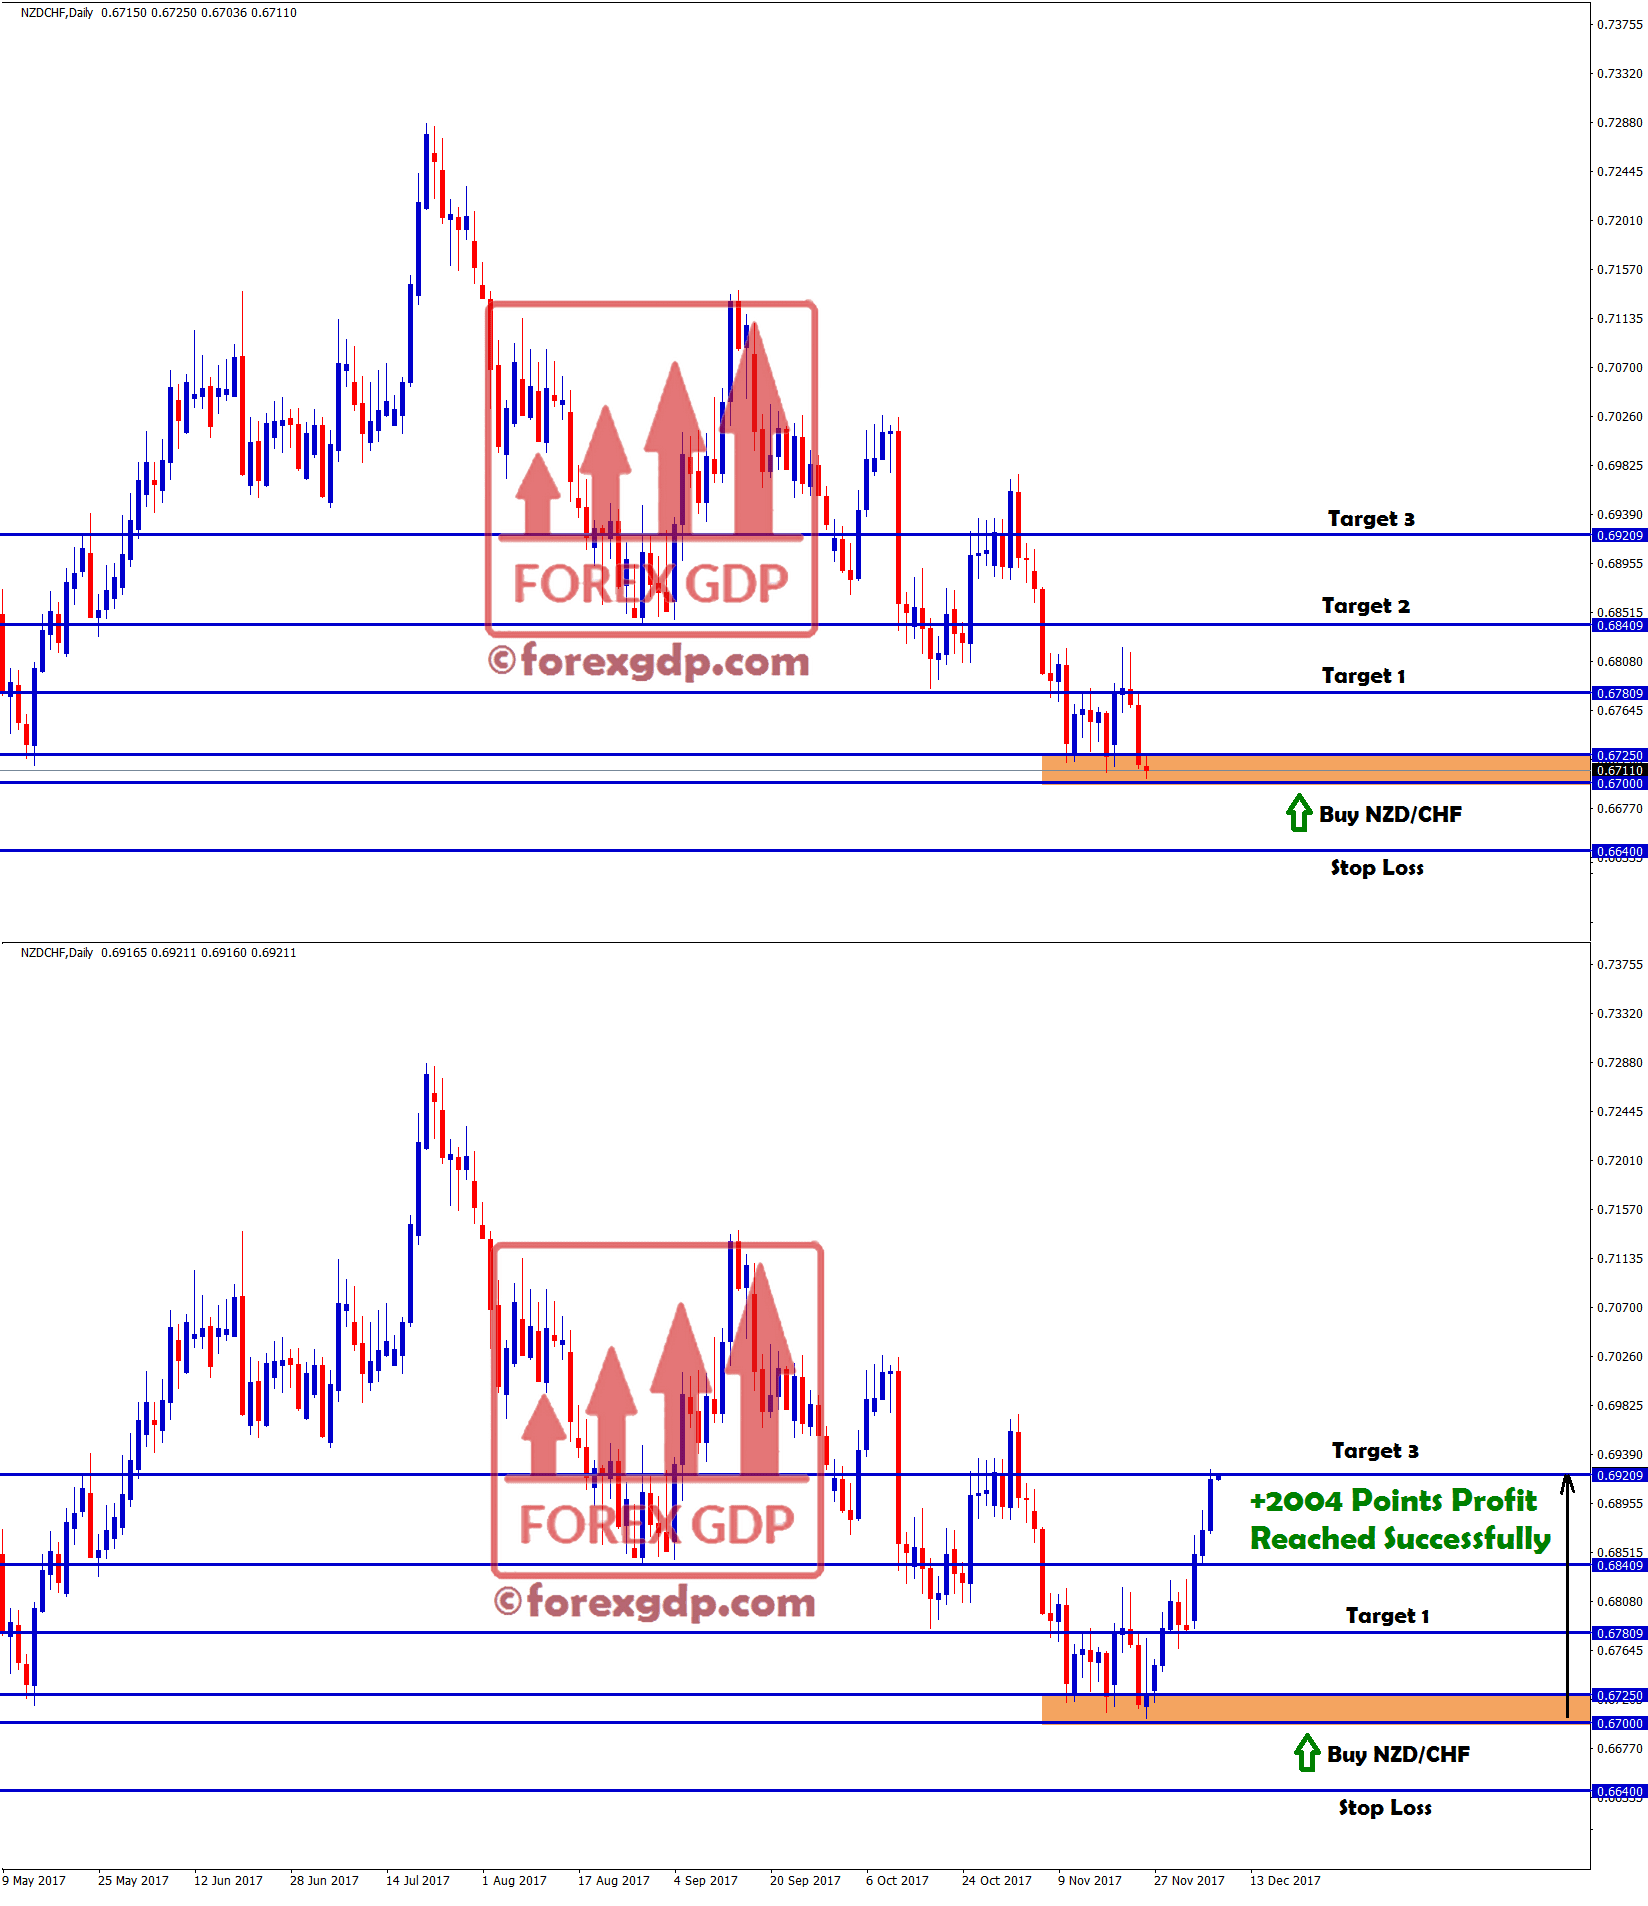 nzdchf target 3 hits with +2004 points profit